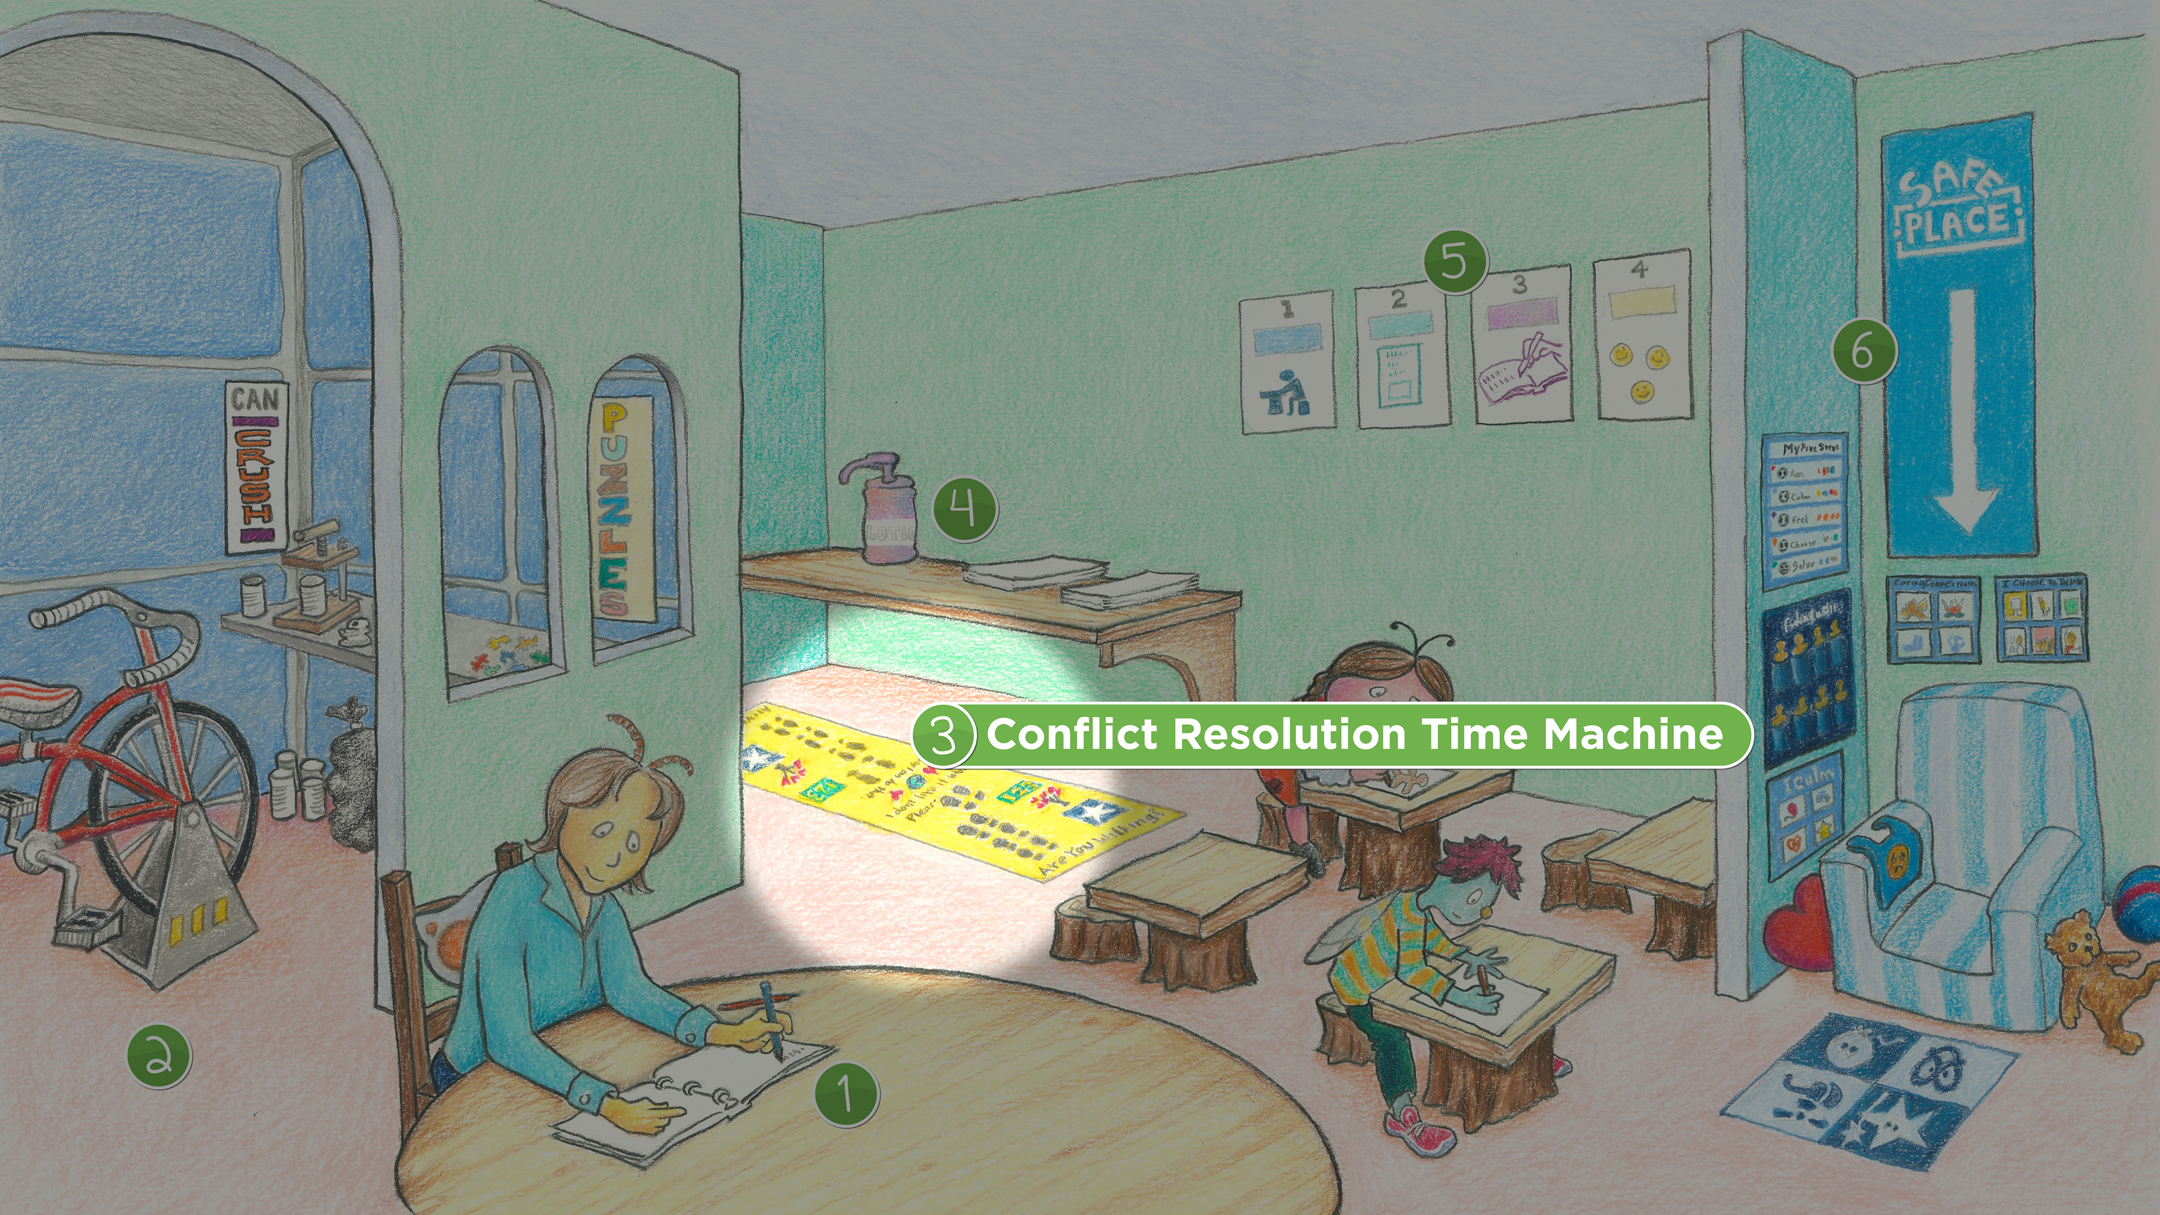 ISS Room: Conflict Resolution Time Machine